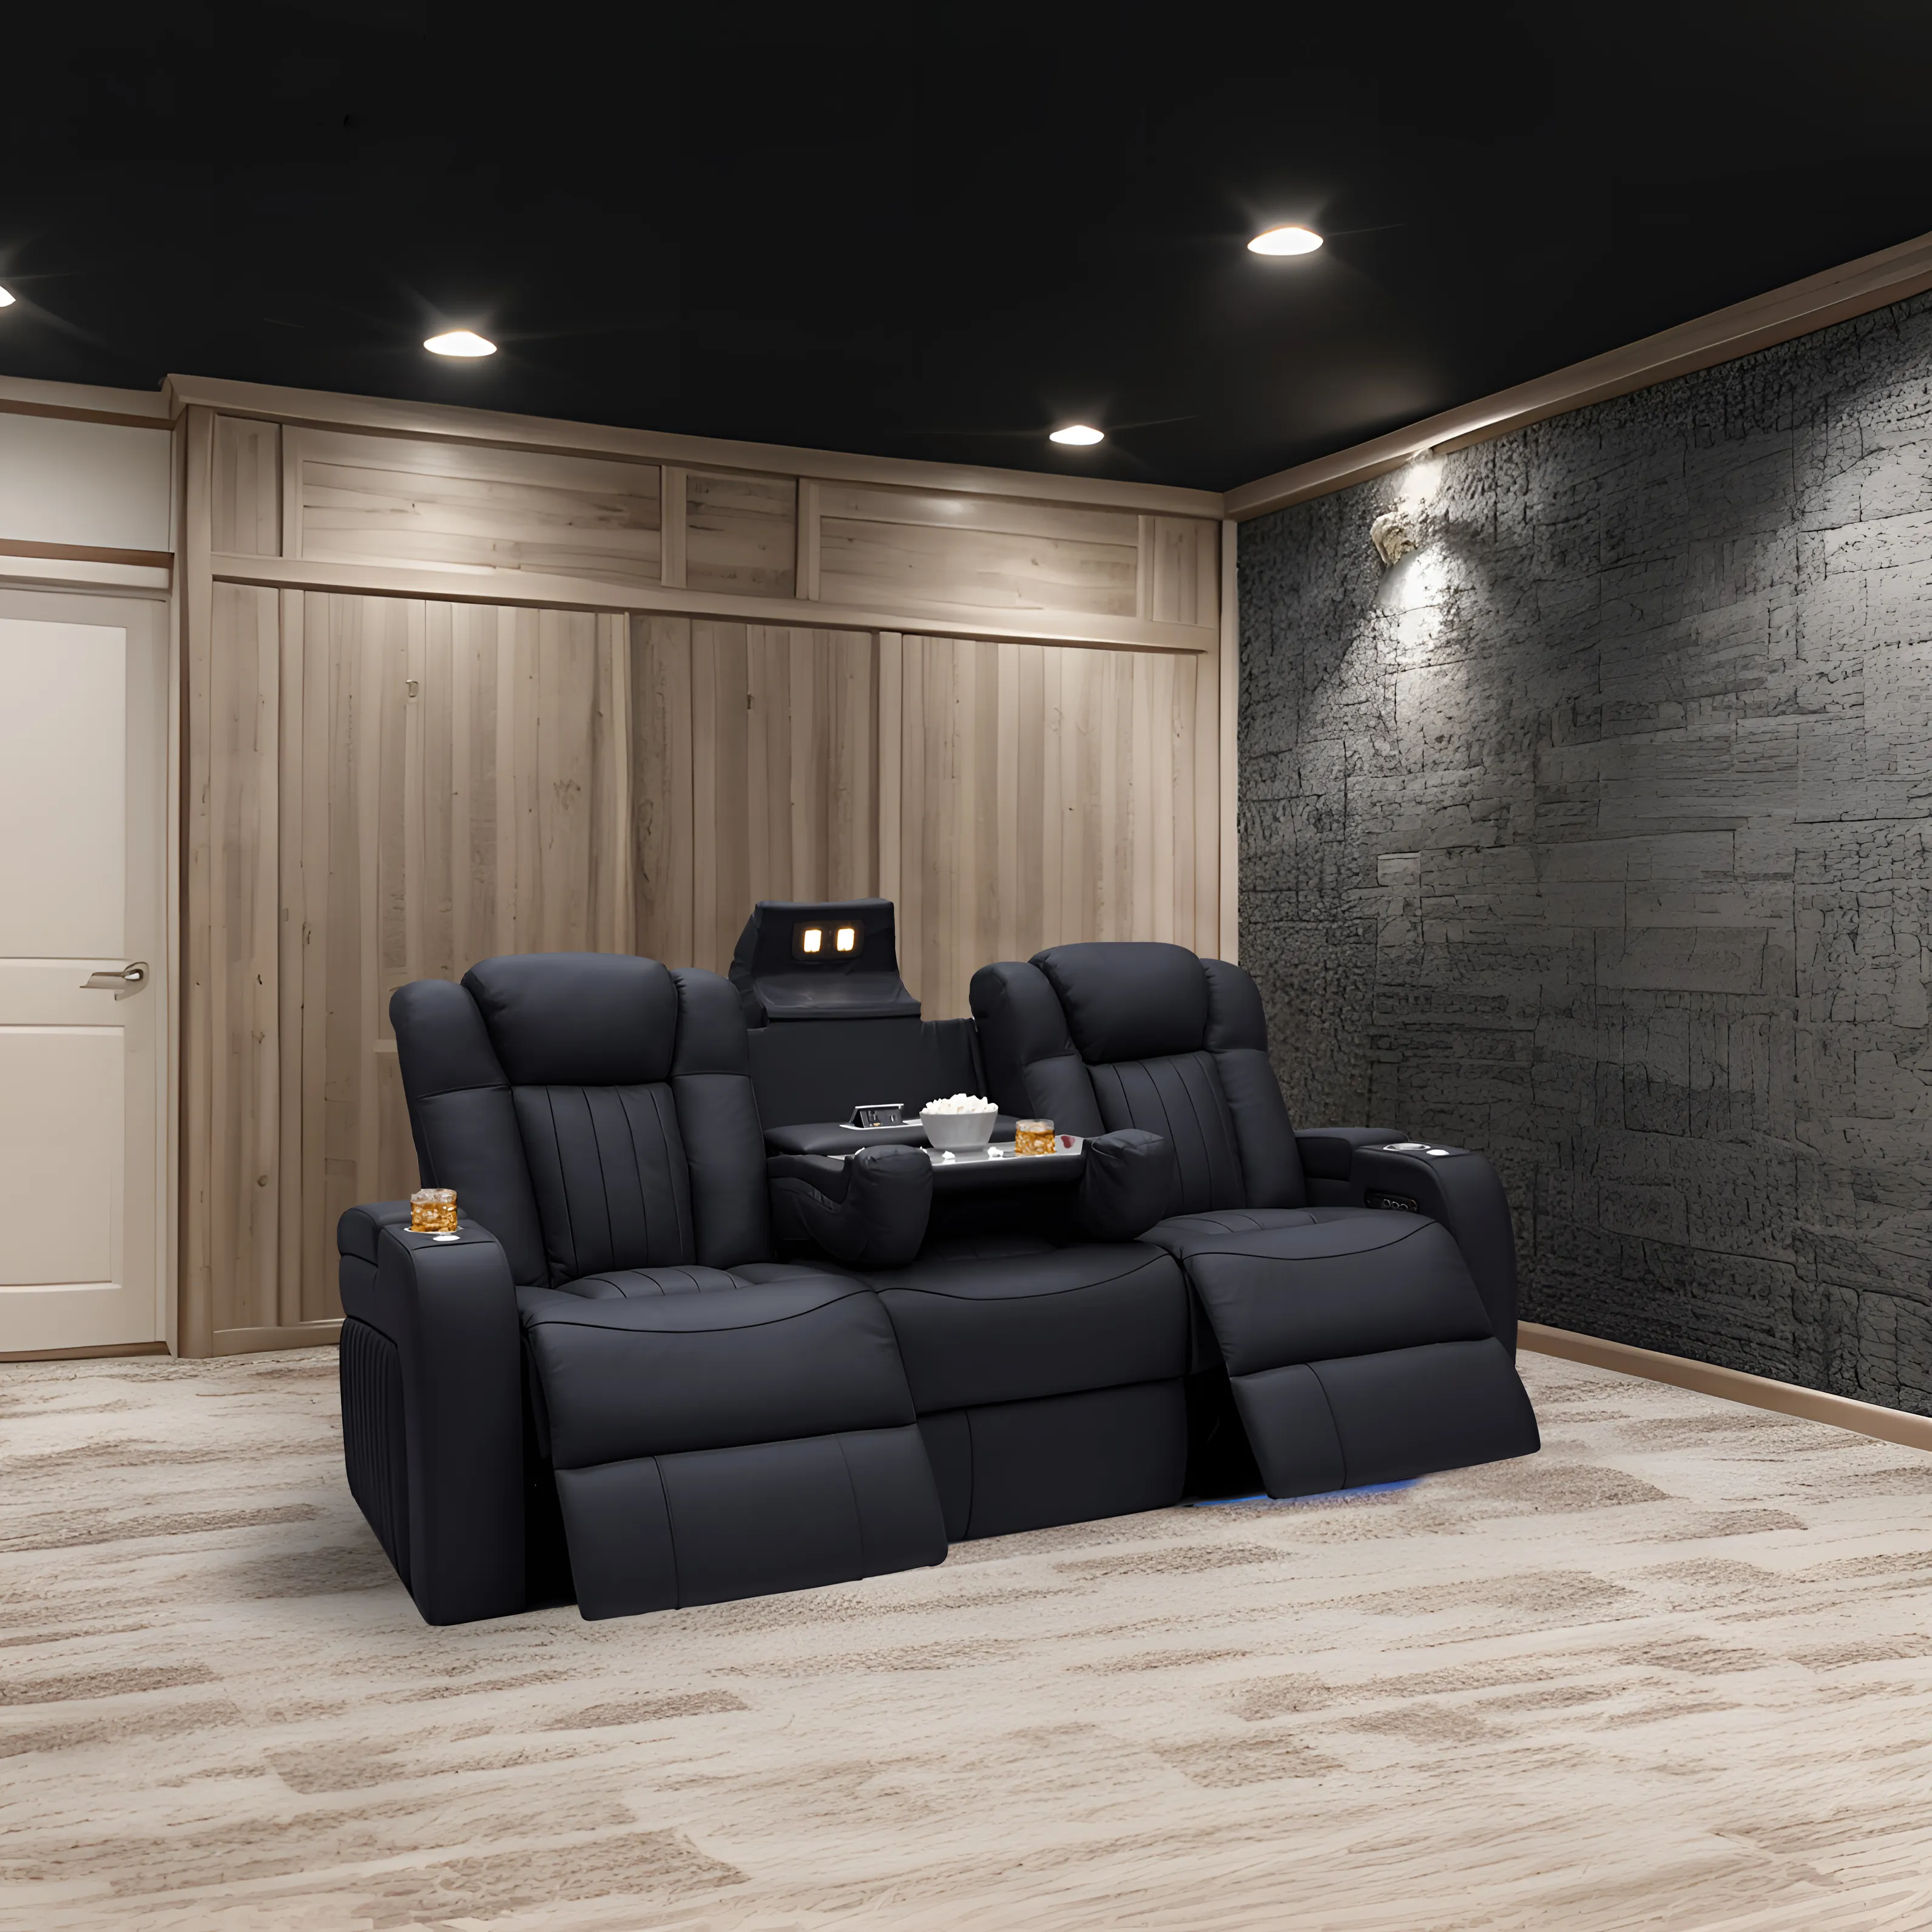 High quality factory direct leather recliner sofa set modern sofa electric recliner home theater with cup holder and storage box